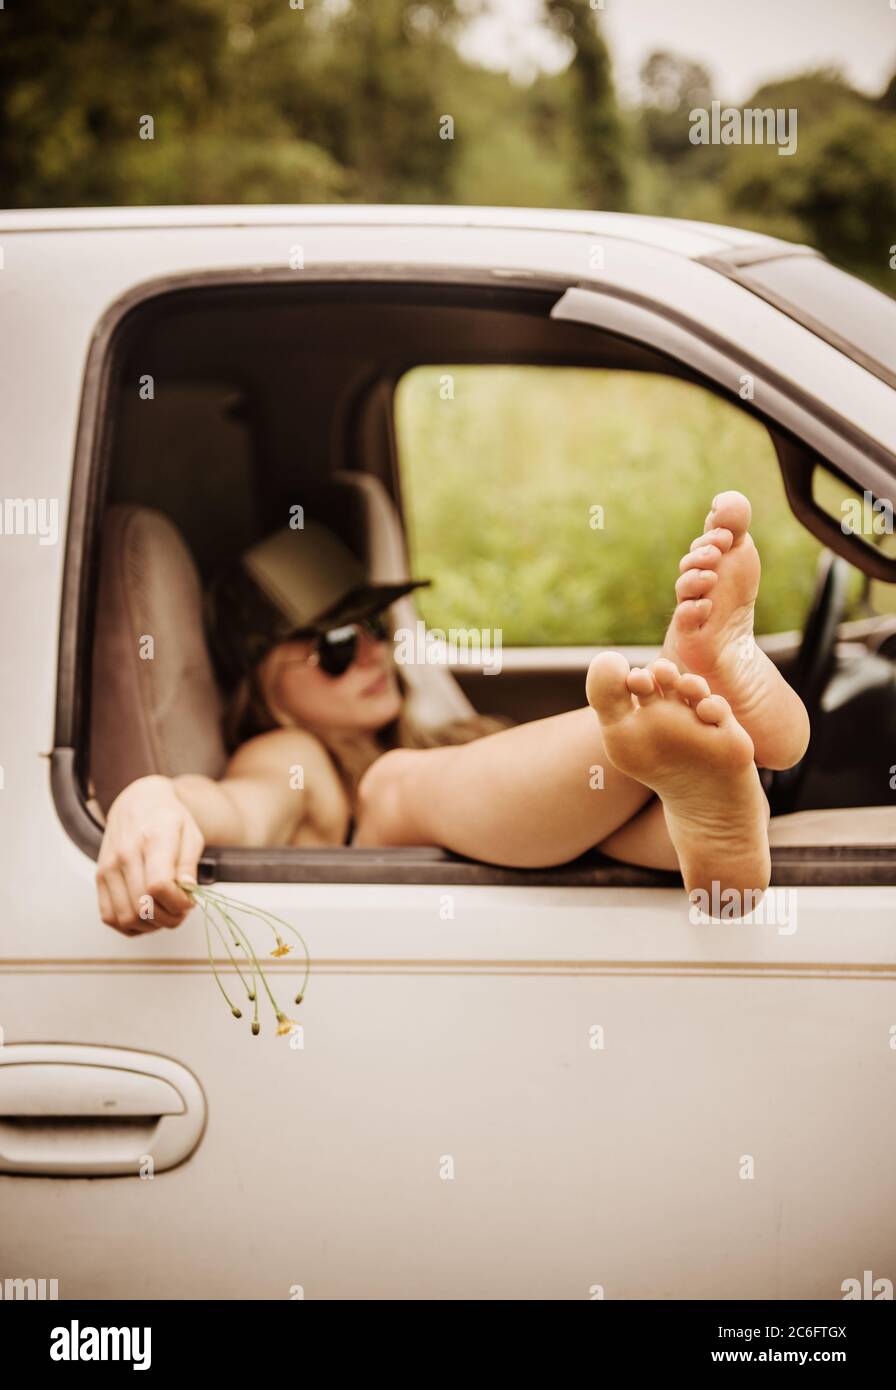 young woman relaxing in her truck Stock Photo